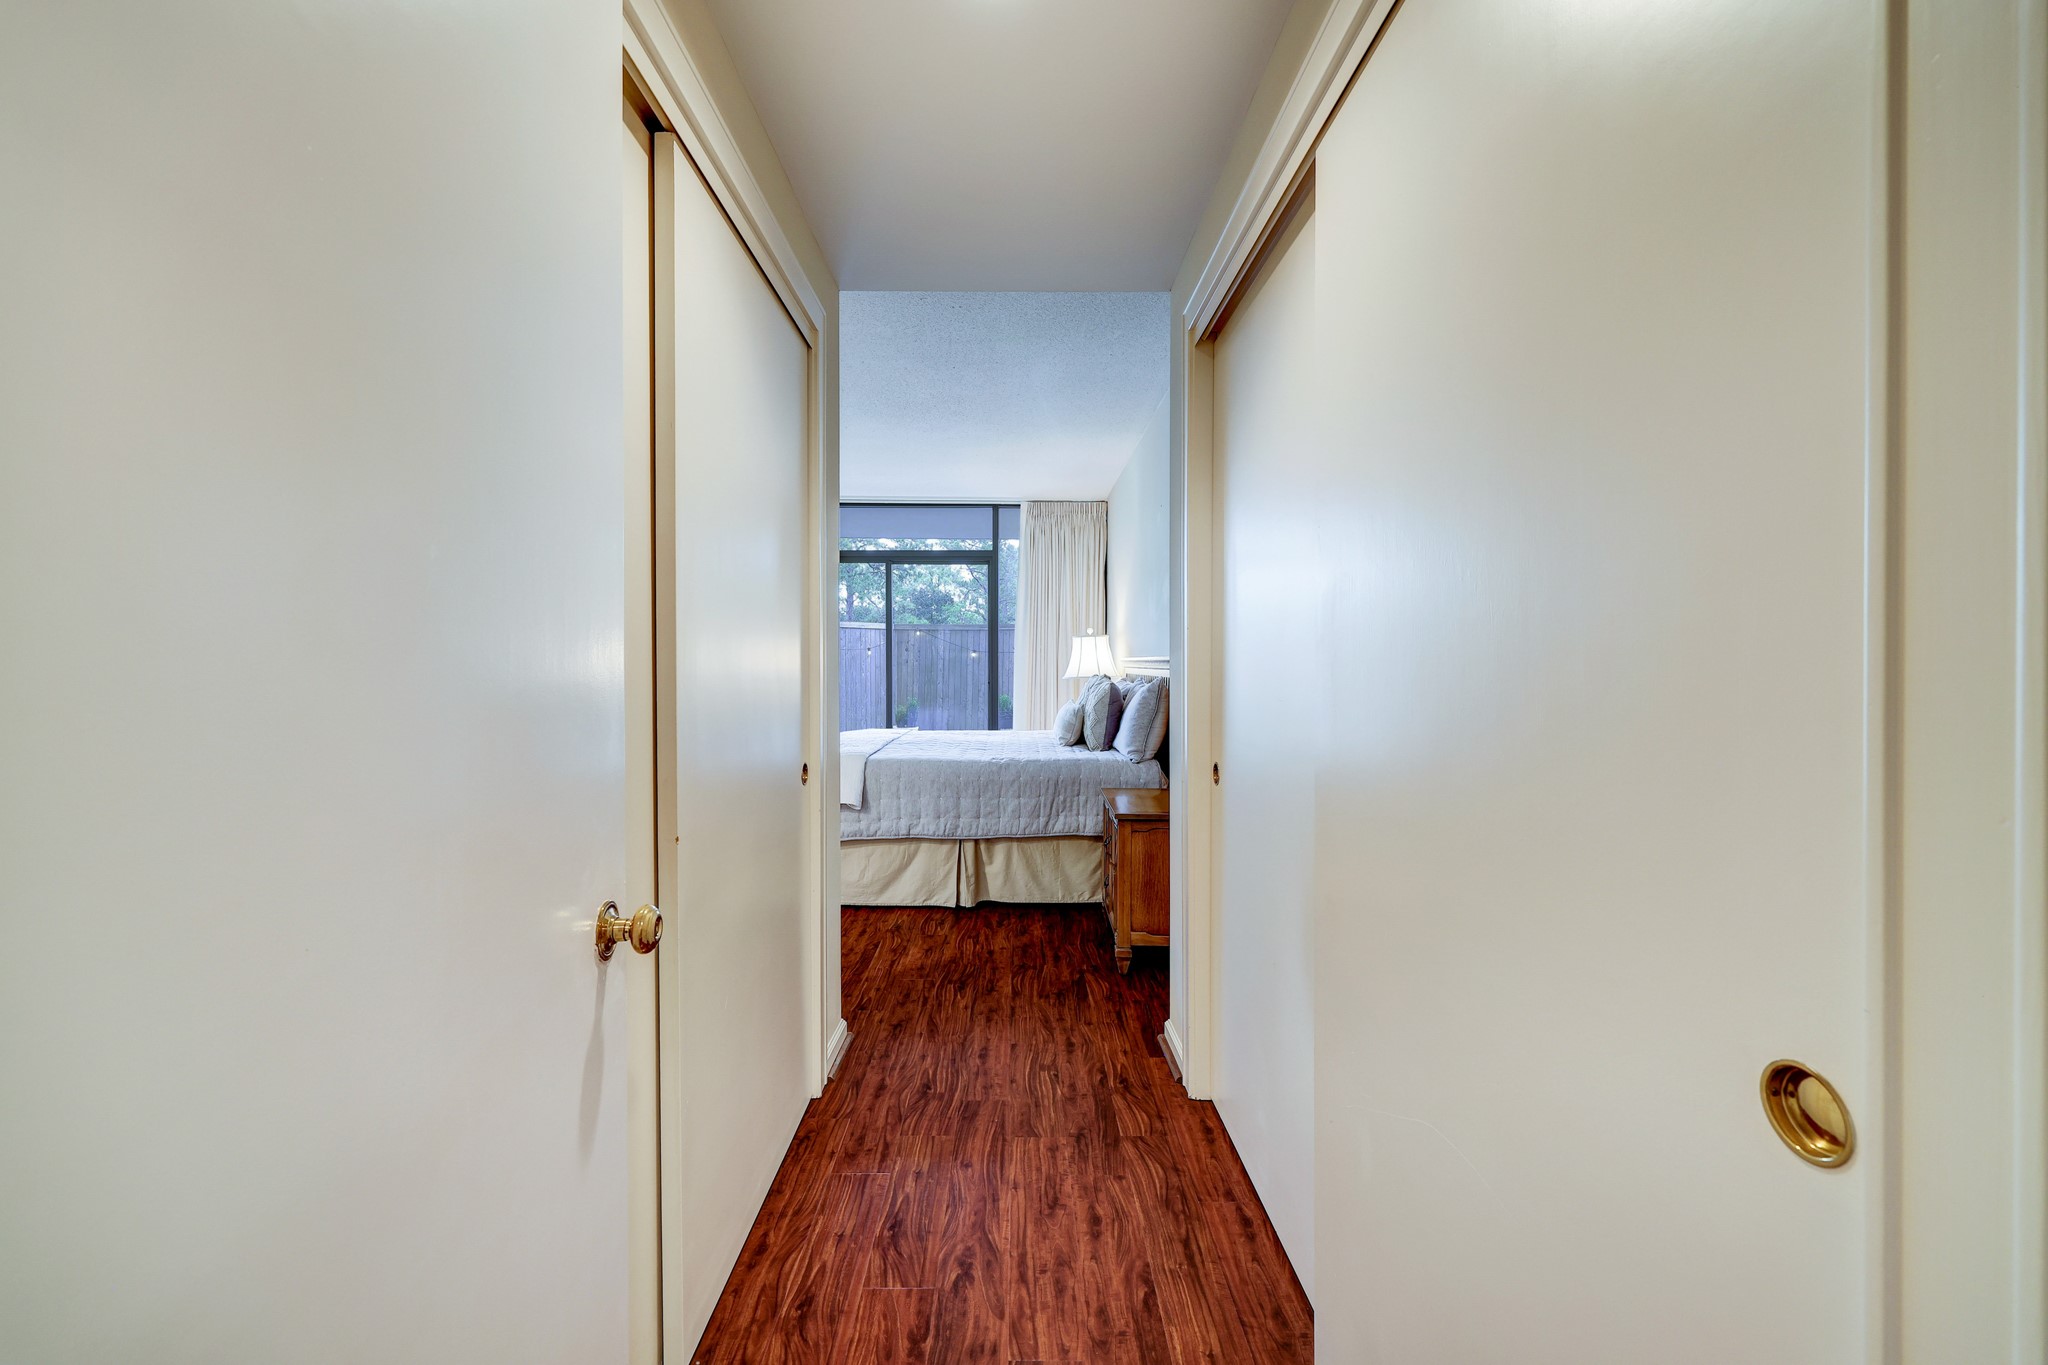 Entry to third bedroom has two spacious closets with sliding doors.